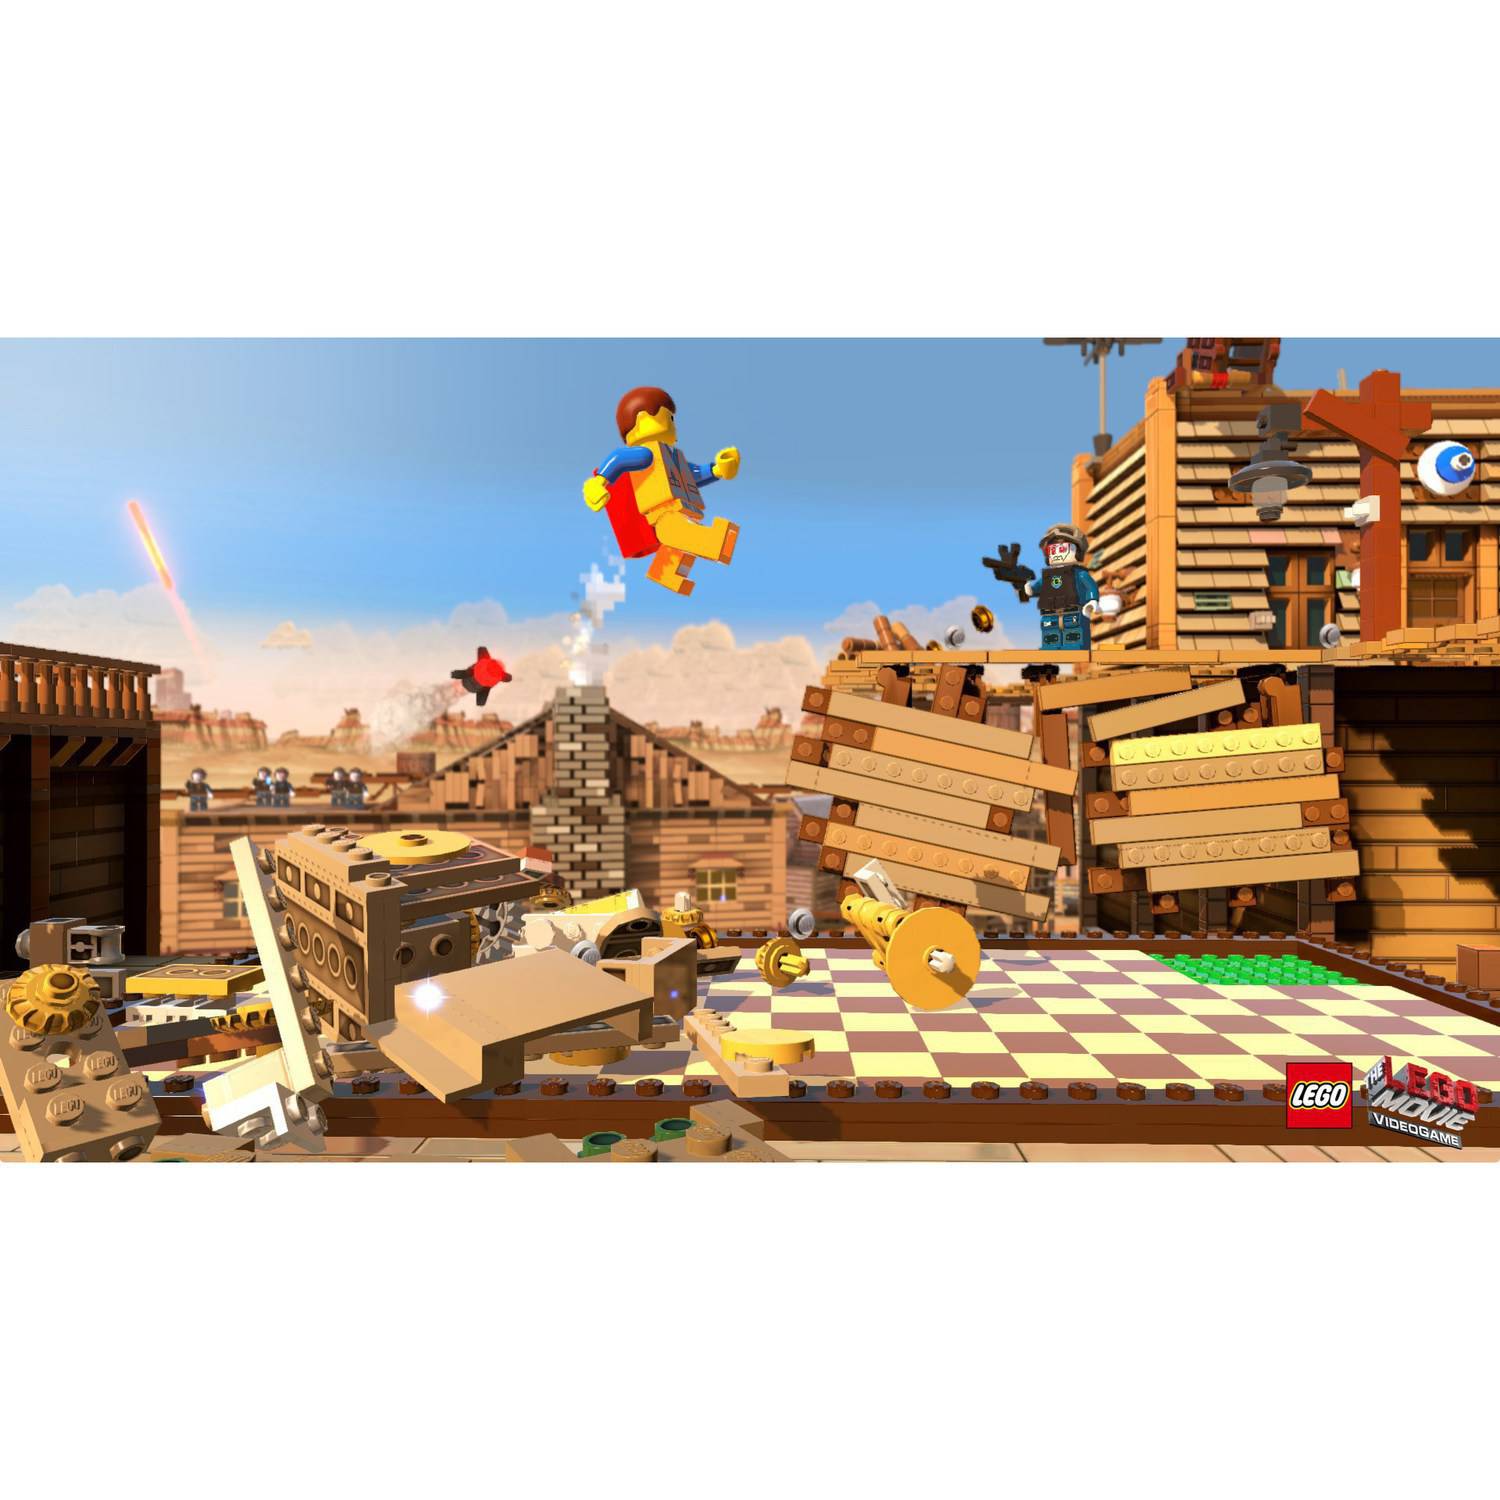 The LEGO Movie Videogame - PlayStation 4 - image 5 of 8